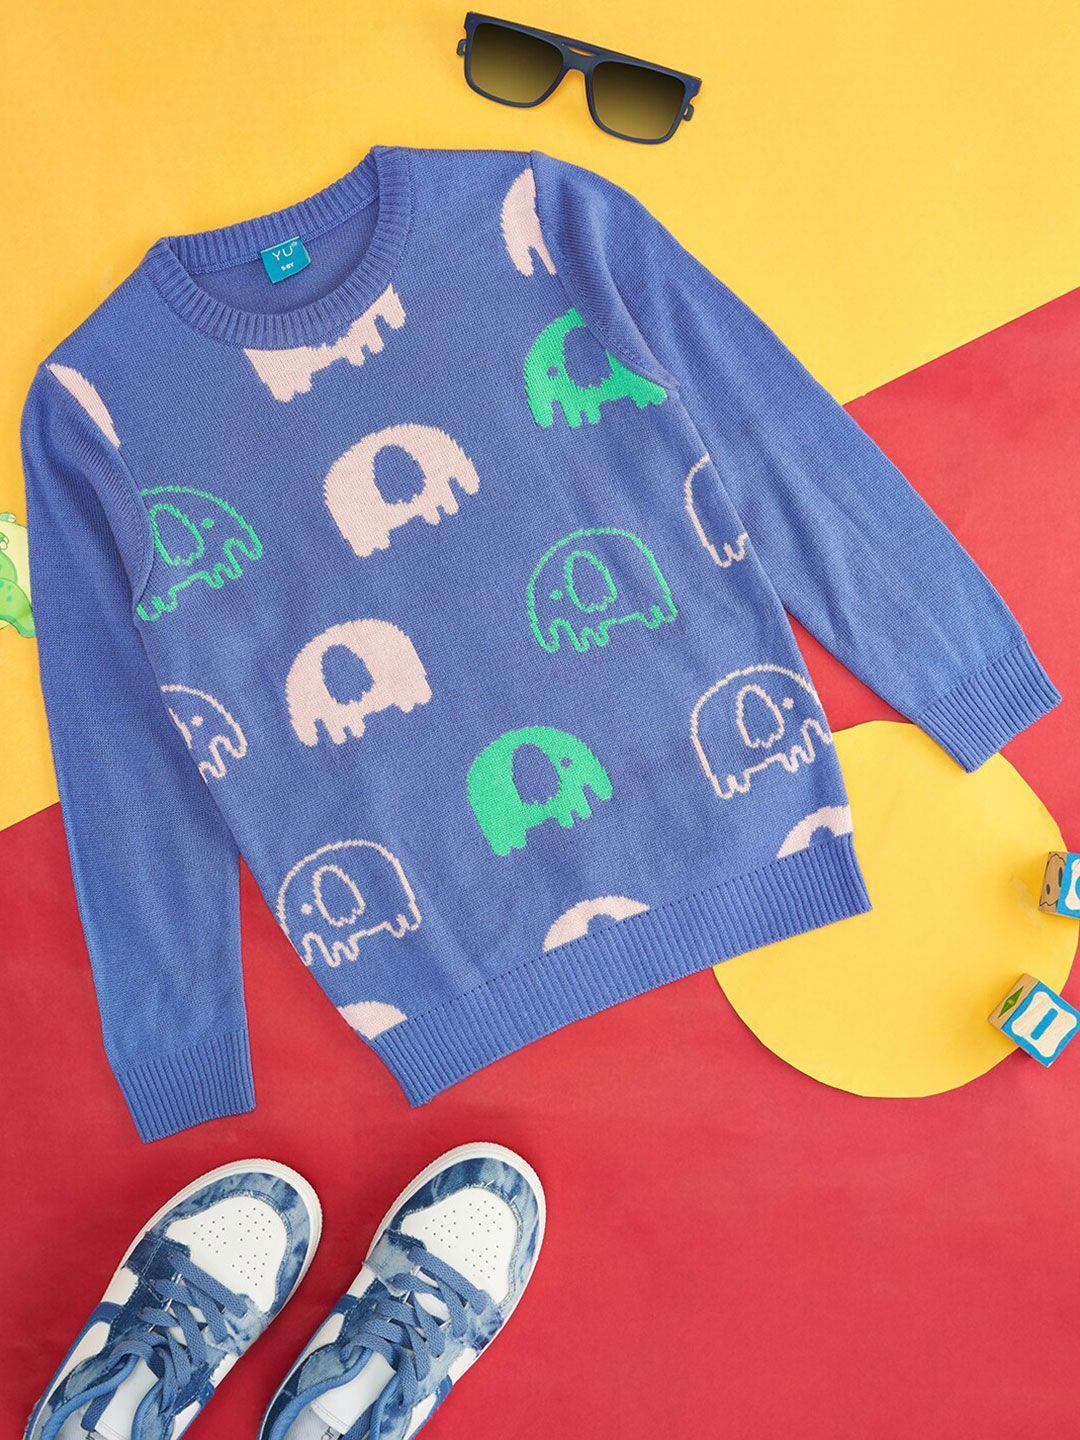 yu-by-pantaloons-boys-graphic-printed-acrylic-pullover-sweaters